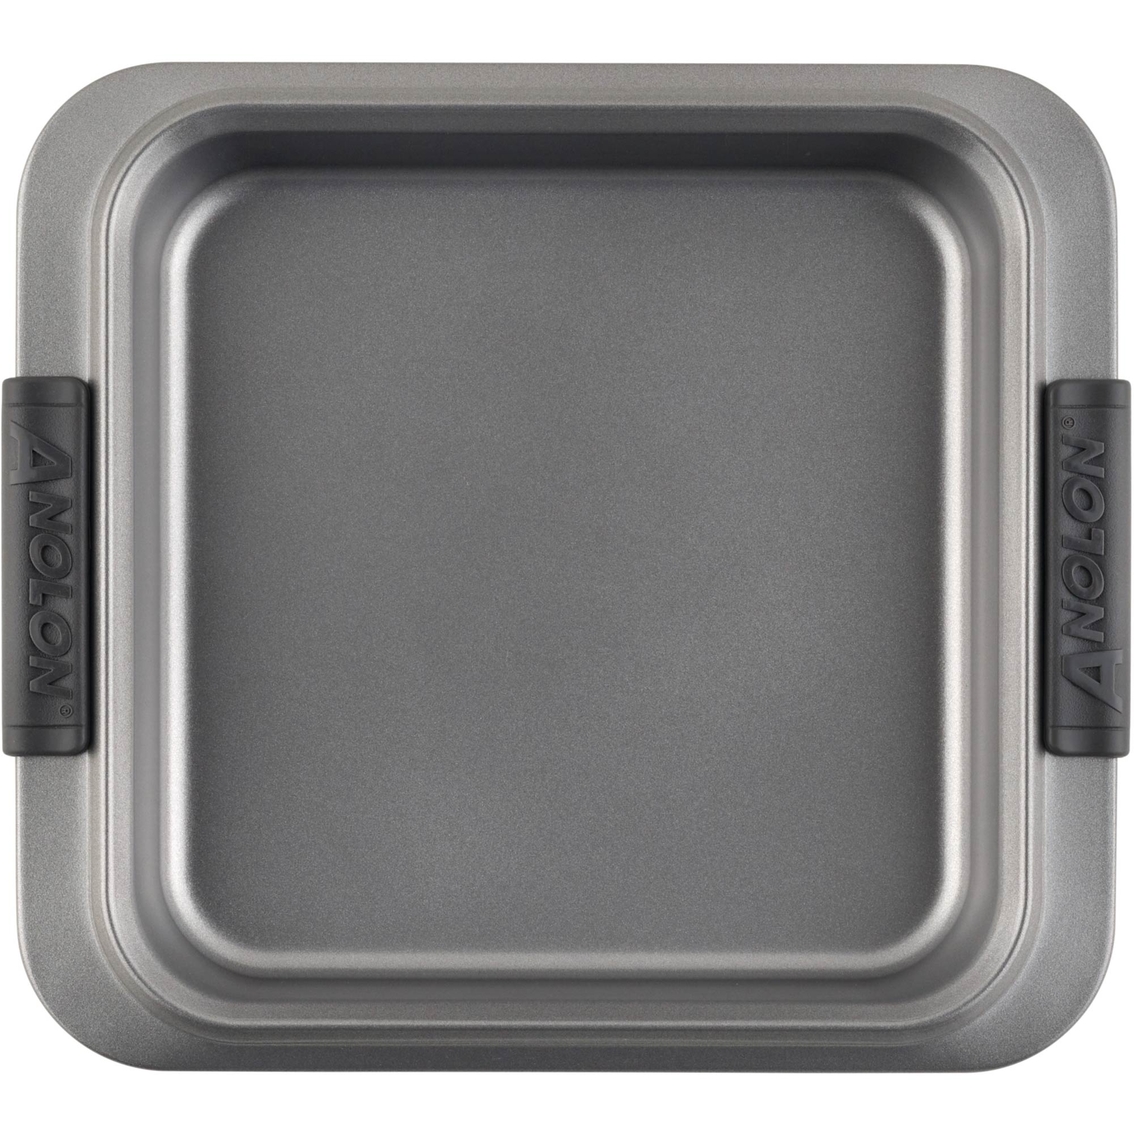 Anolon Advanced Nonstick Bakeware 9 in. Square Silicone Grips Cake Pan - Image 3 of 4